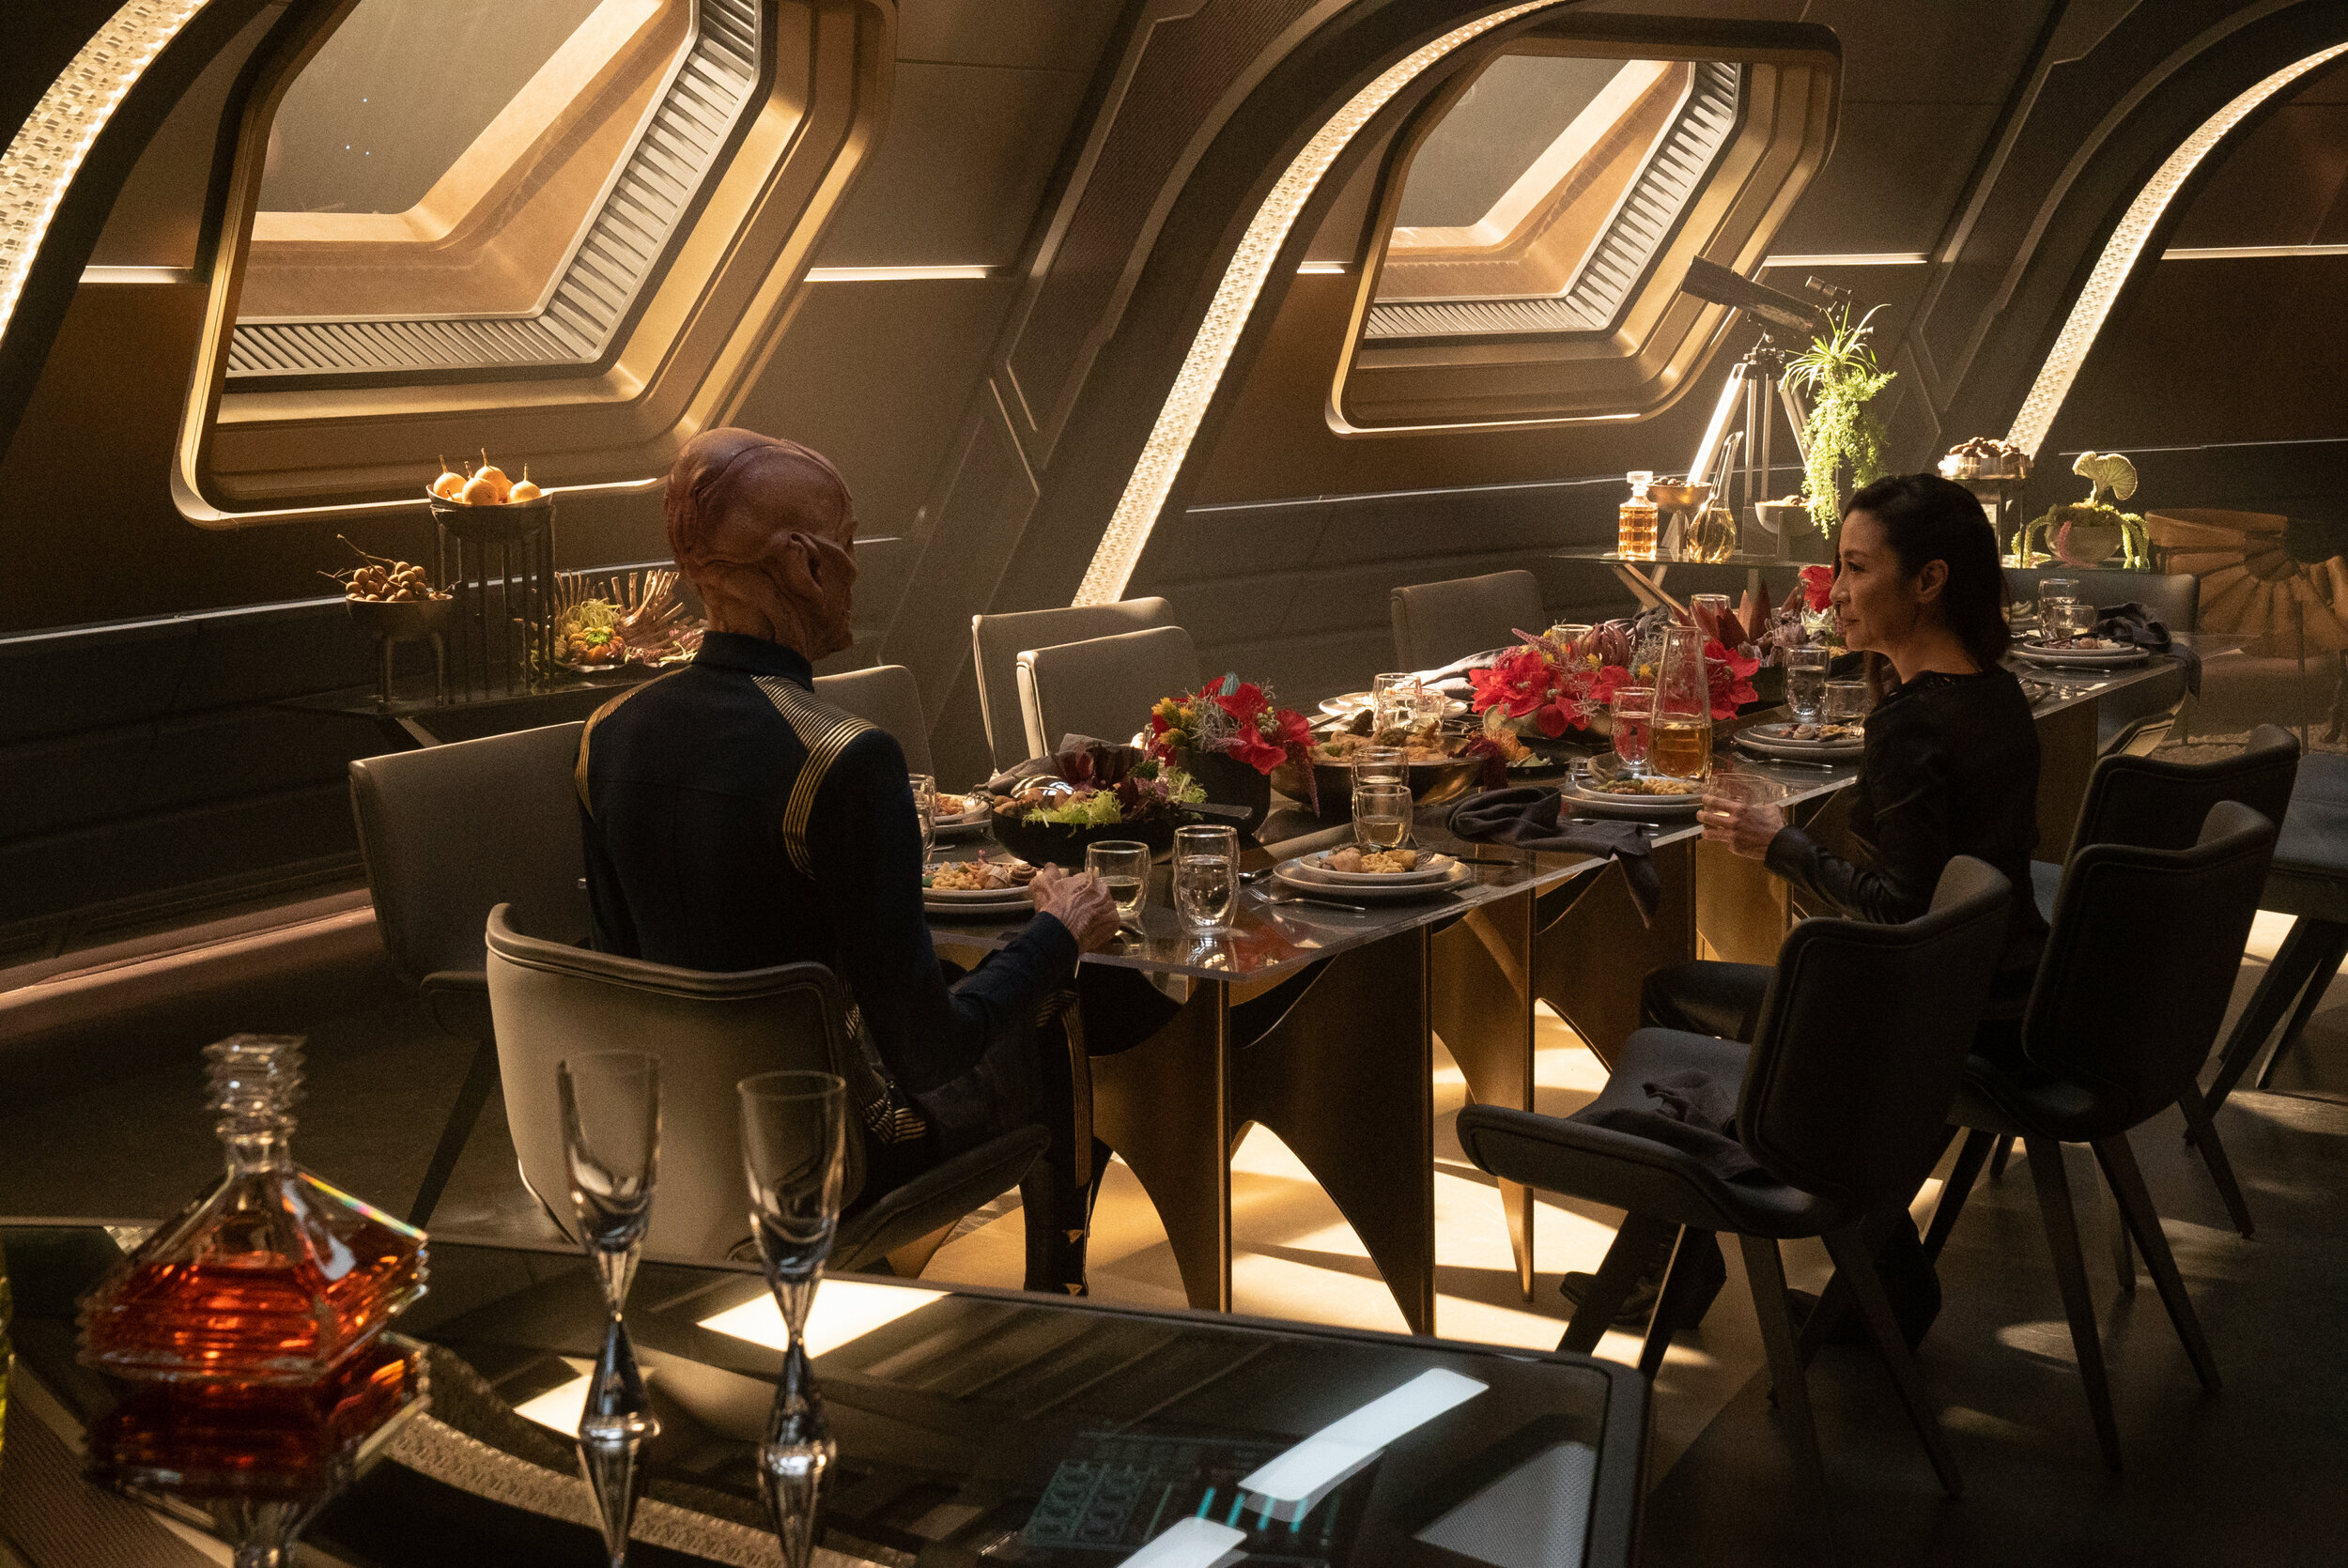   "Forget Me Not" -- Ep#304 -- Pictured: Doug Jones as Saru and Michelle Yeoh as Georgiou of the CBS All Access series STAR TREK: DISCOVERY. Photo Cr: Michael Gibson/CBS ©2020 CBS Interactive, Inc. All Rights Reserved.  